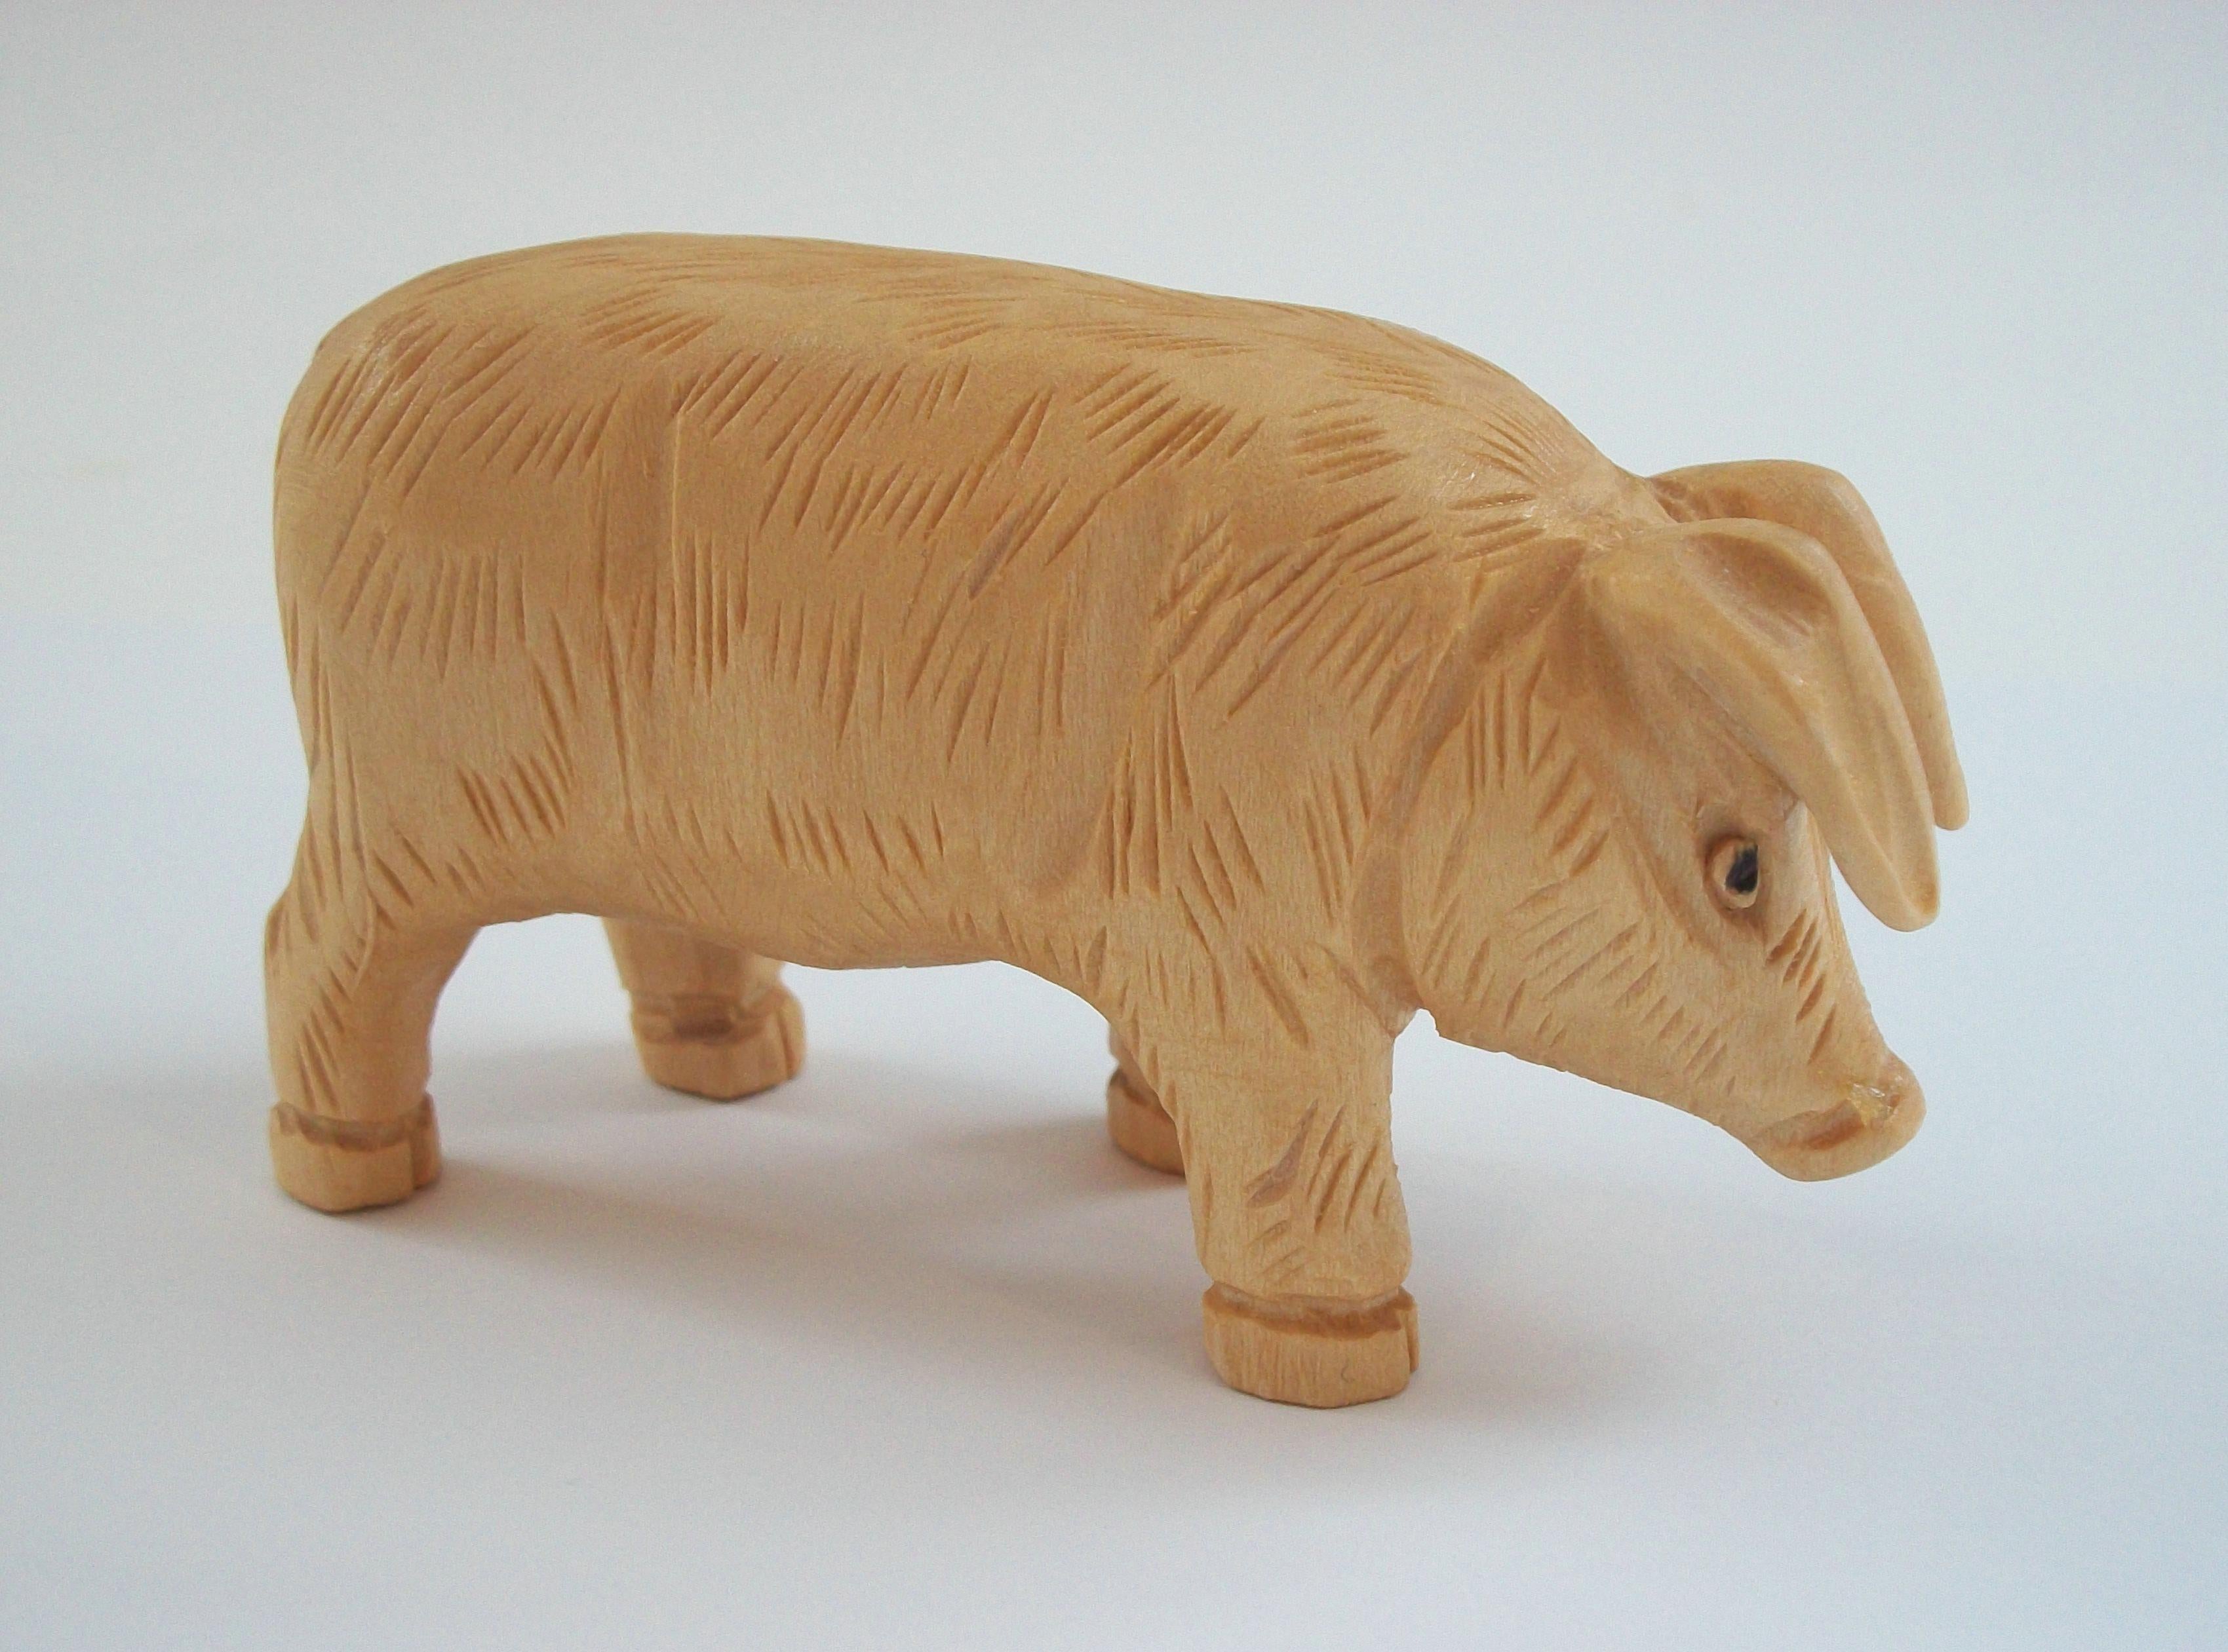 ATELIER NOËL GUAY - Vintage pine sculpture of a pig - featuring a well modelled form with an intricately chiseled coat, large drooping ears and closely cropped tail - unvarnished finish - signed on the belly - Canada (Quebec) - late 20th